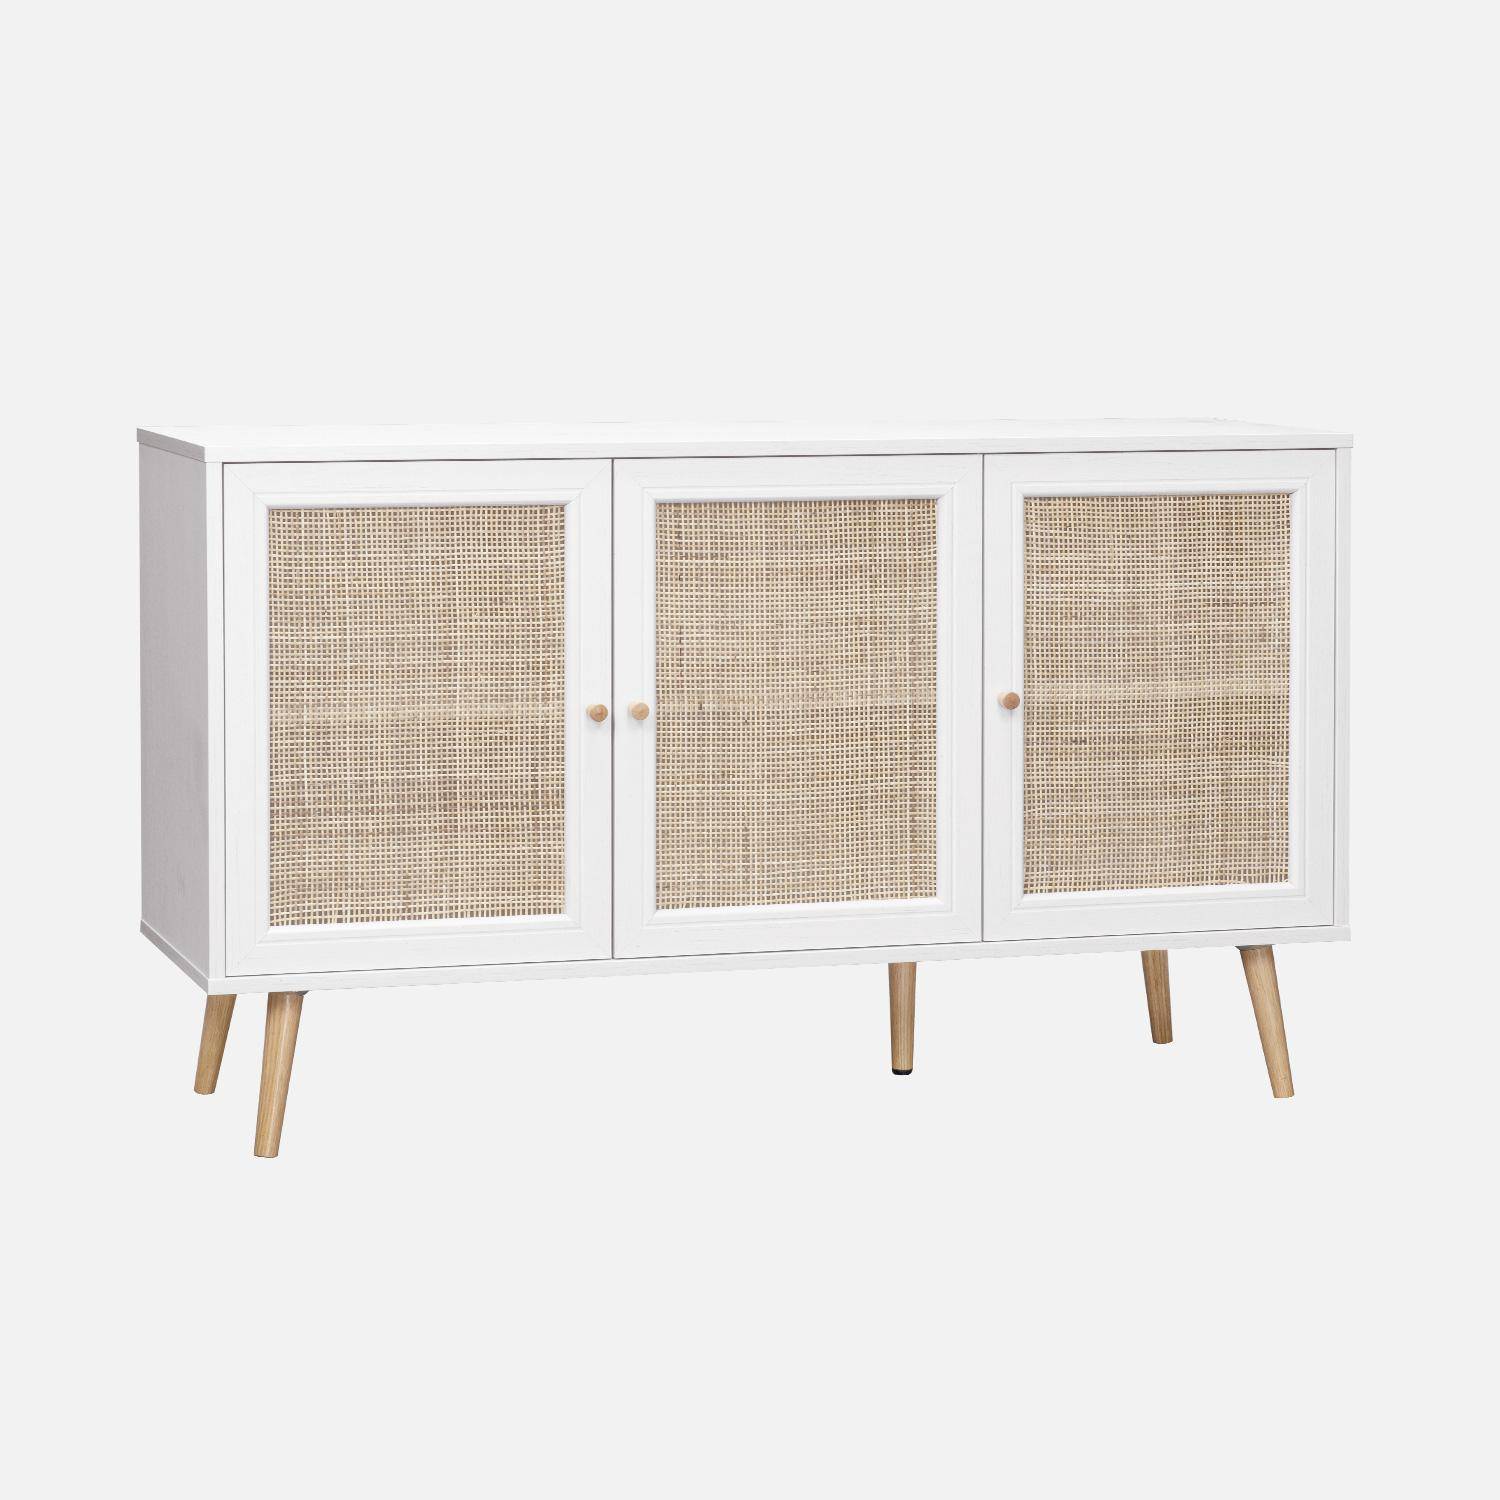 Wooden and cane rattan detail sideboard with 3 doors, 2 shelves, Scandi-style legs, 120x39x70cm - Boheme - White Photo4